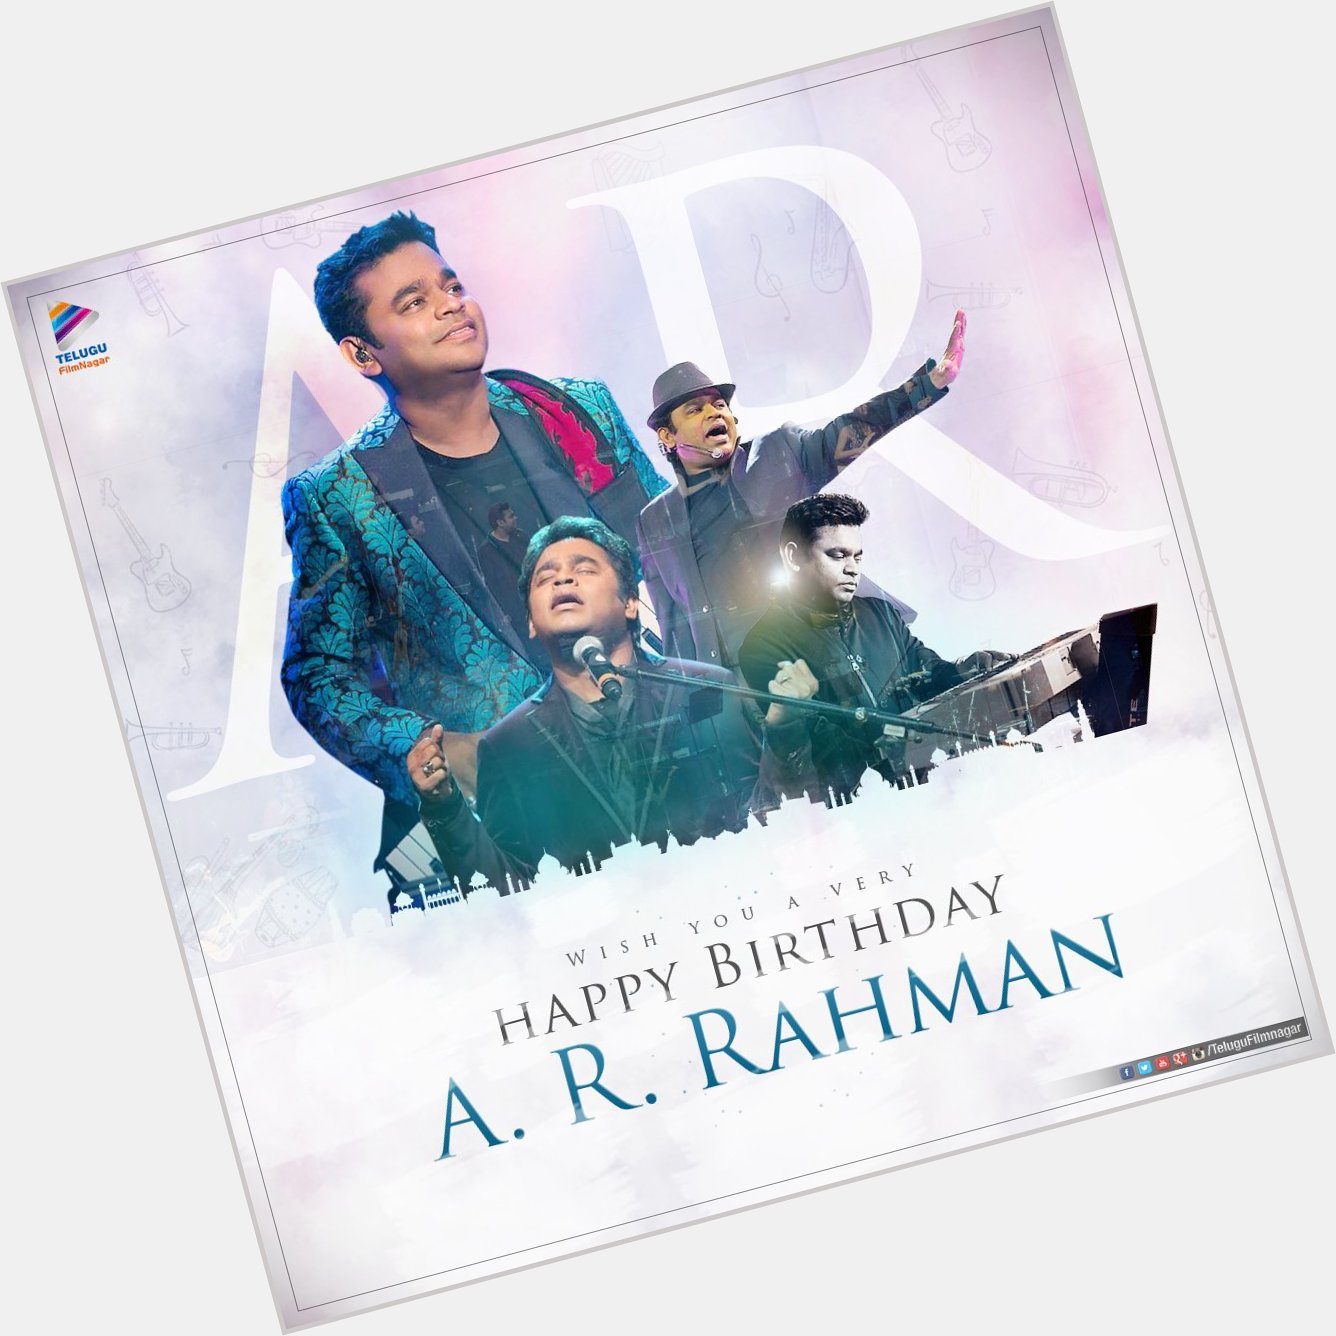 HAPPY Birthday to A.R.RAHMAN sir Have a Victorious year ahead 